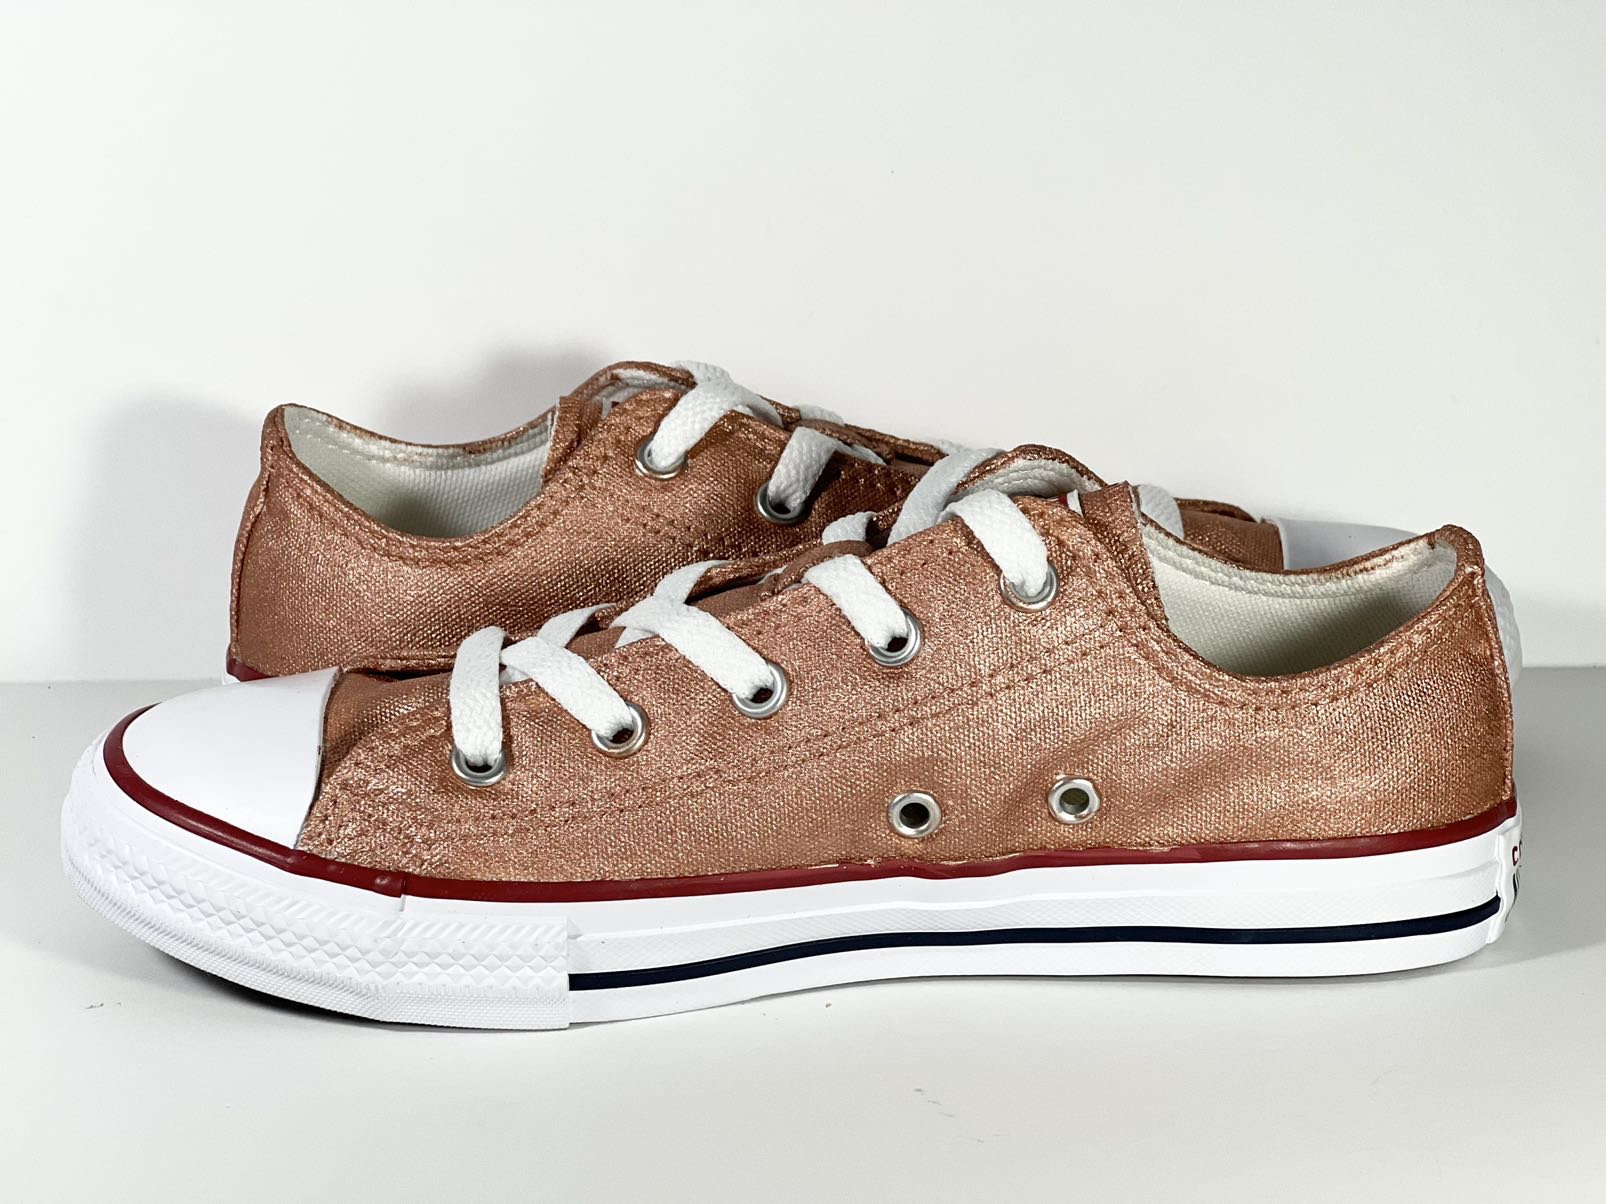 Metallic Shimmer Rose Gold Converse All Star Low Top Shoes - Etsy